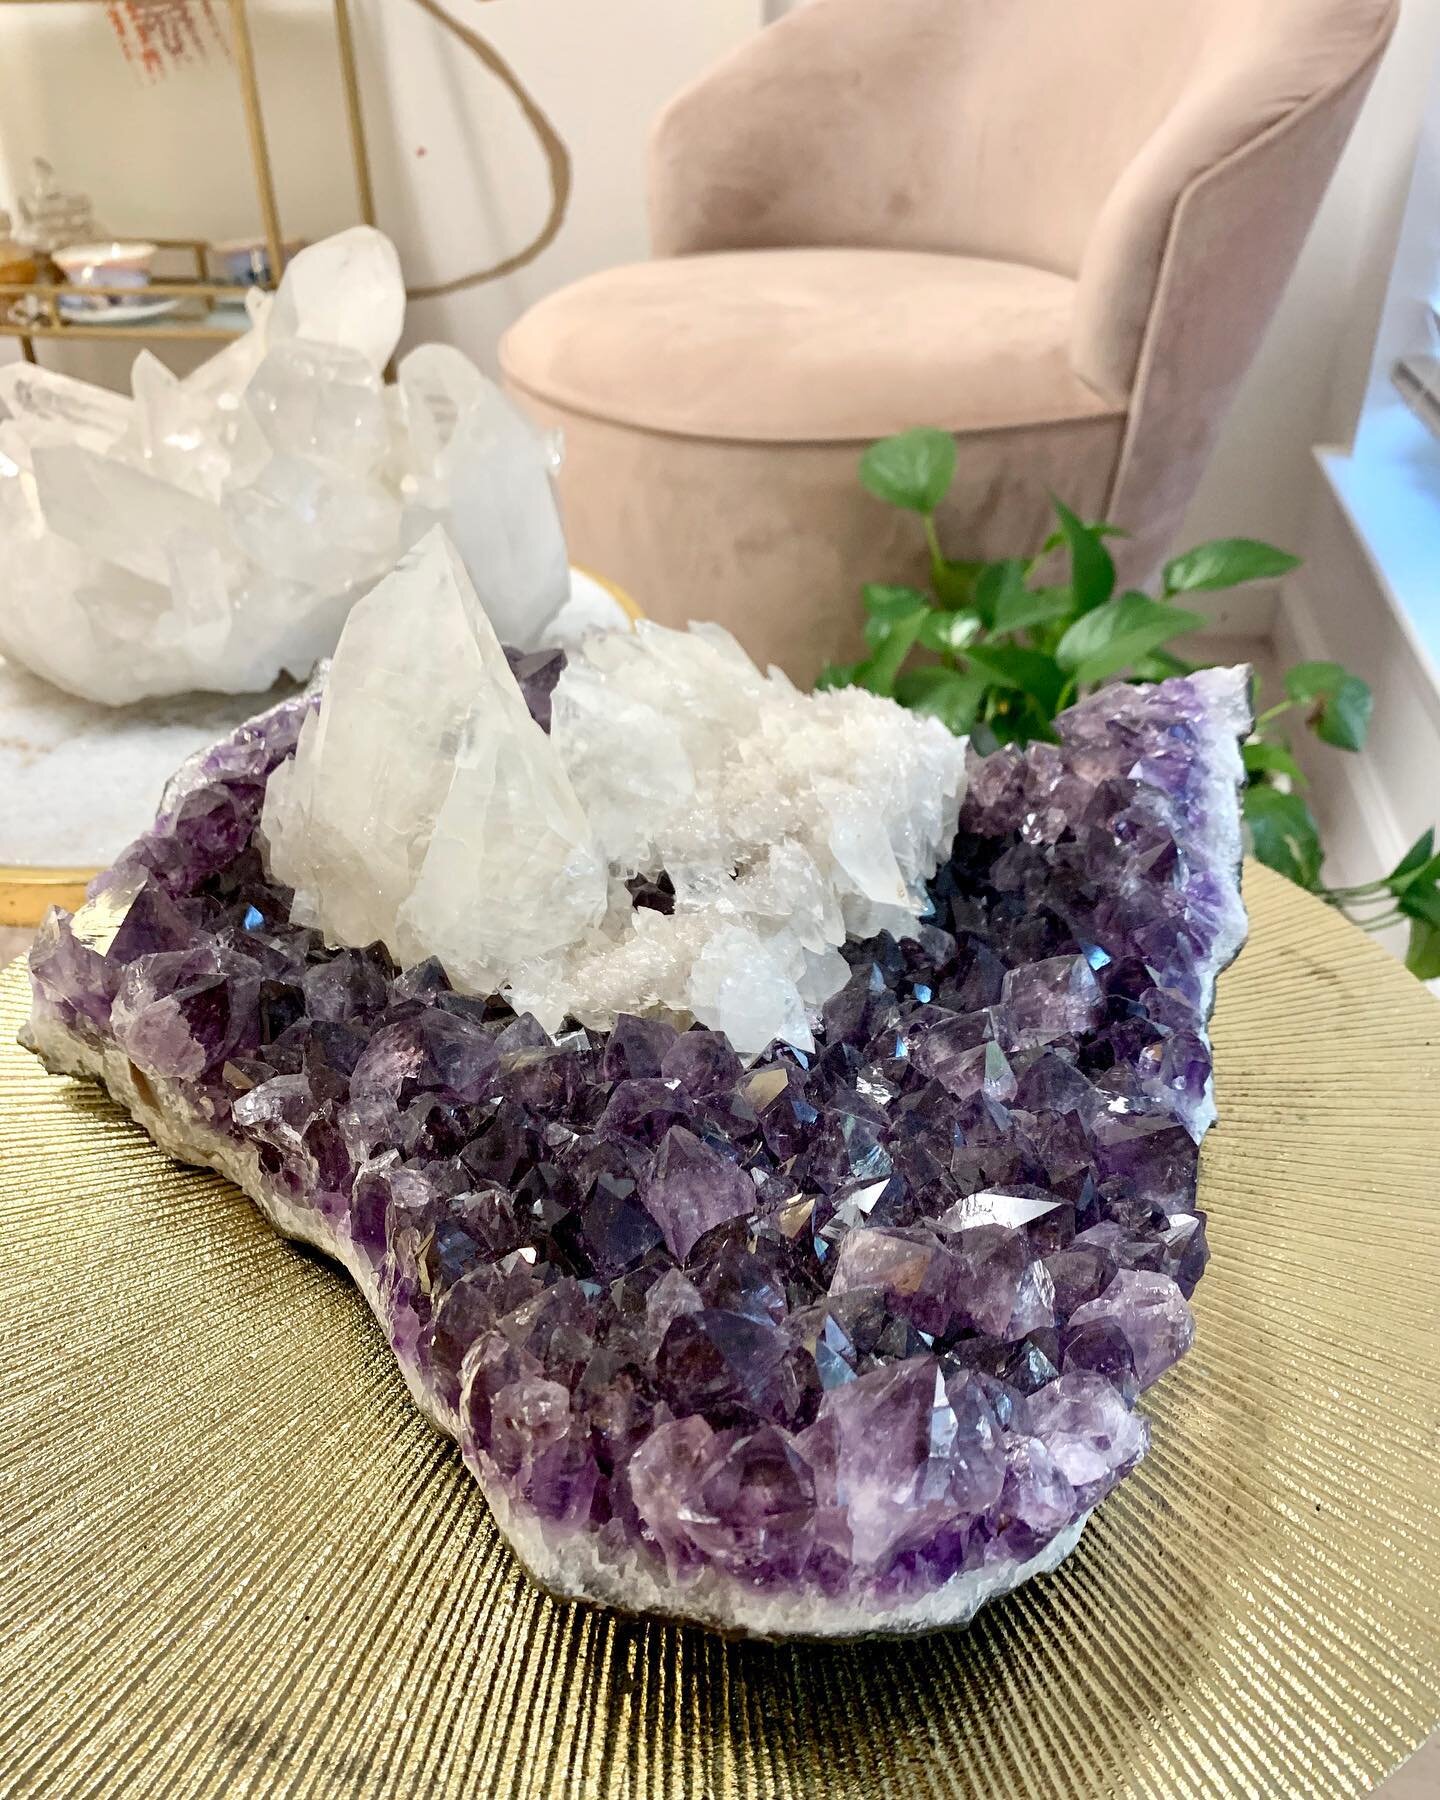 Crystal collection on point ☝🏻🔮
.
Deep Purple Amethyst with Calcite and Druzy Sparkles ✨
.
DM for pricing 🤗